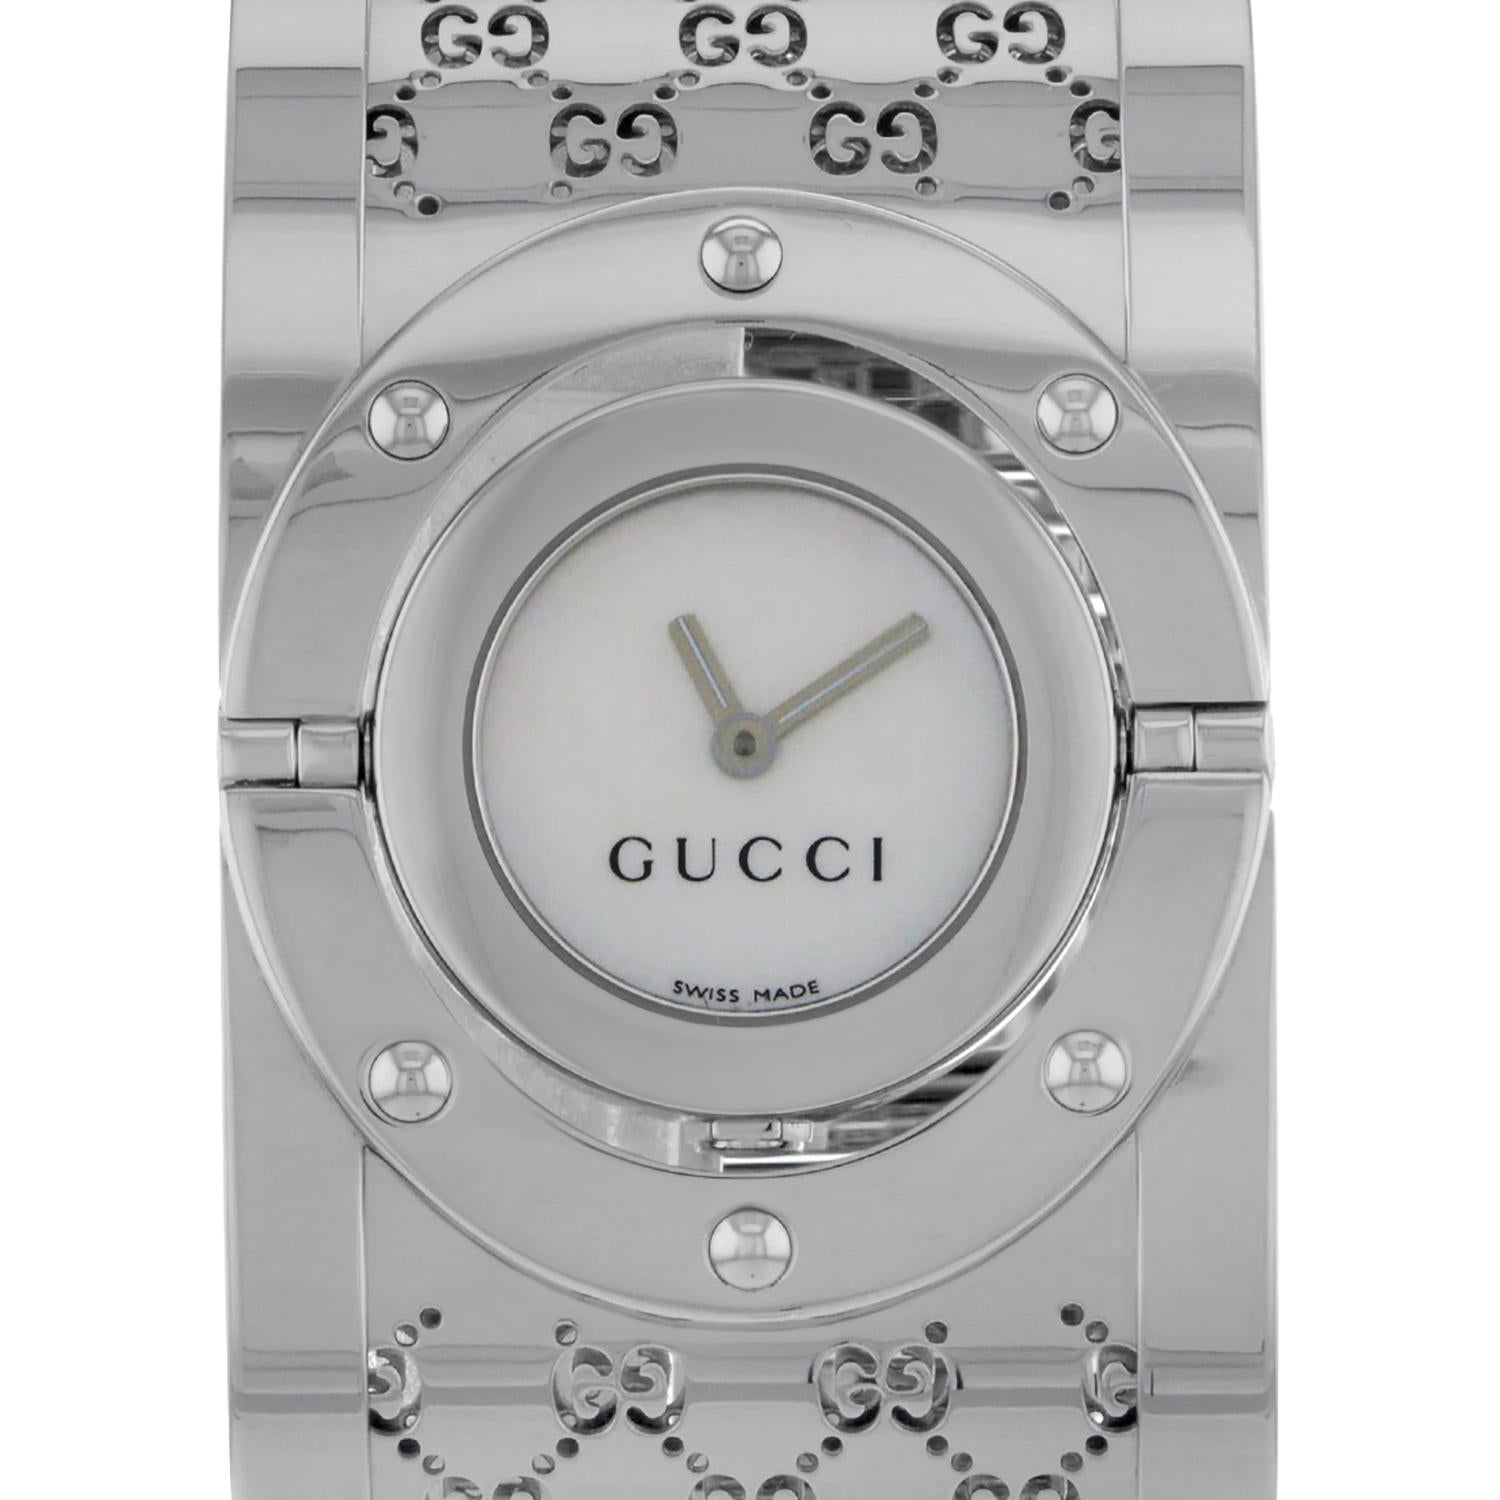 Display model Gucci Series 112 YA112413 Twirl Bangle Style Wide White Dial Ladies Watch. Original Box and Papers are Included. Covered by a 3-year Chronostore Warranty. 
Details:
Brand Gucci 
Department Women
Model Number YA112413
Country/Region of